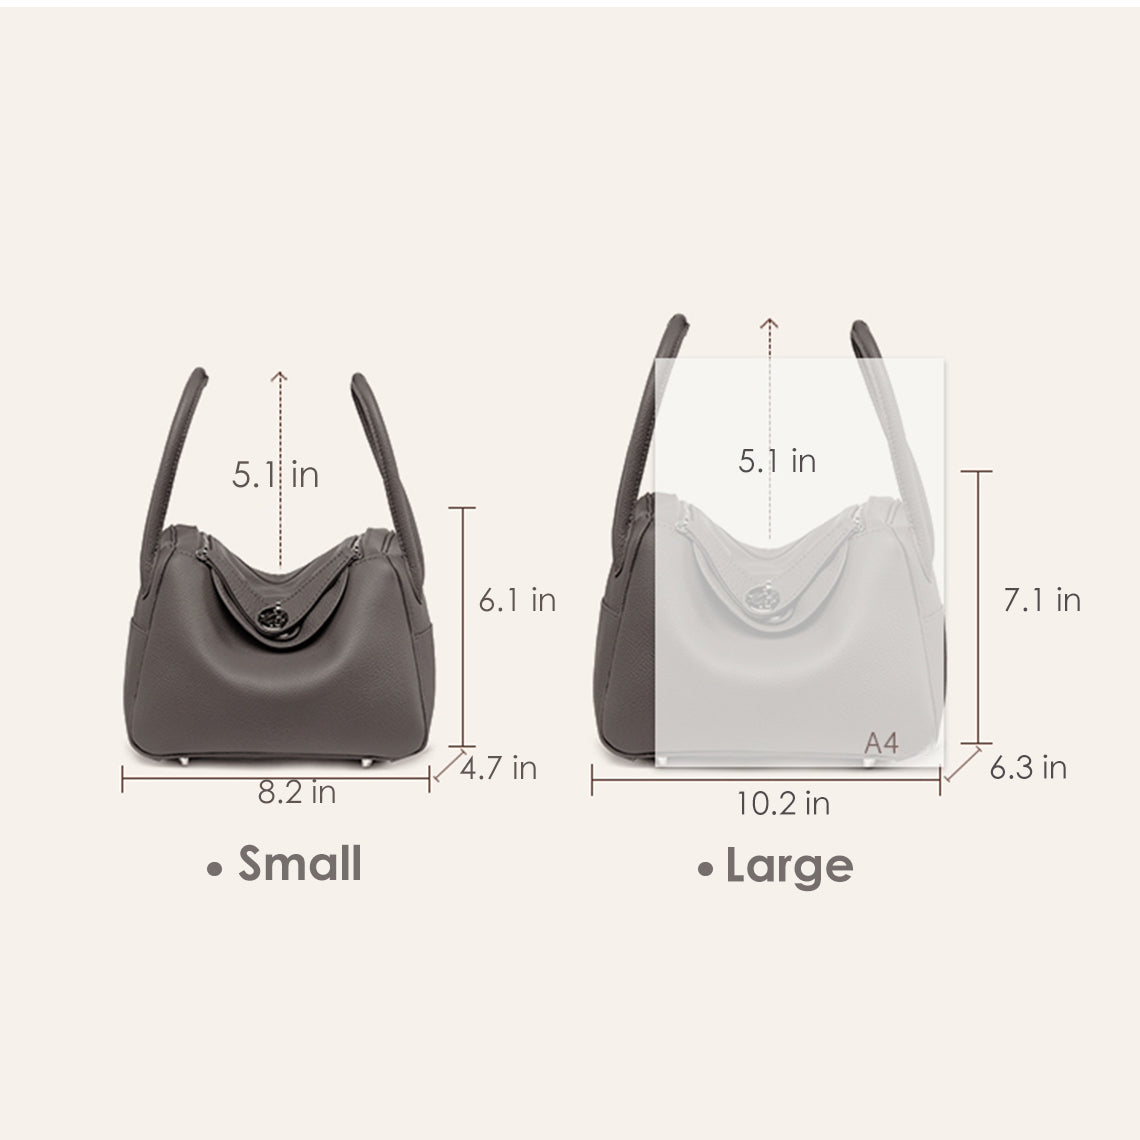 Large & Small & Mini Lindy Bag Price is affordable  | Lindy Bag  26 34 30 | POPSEWING™ 